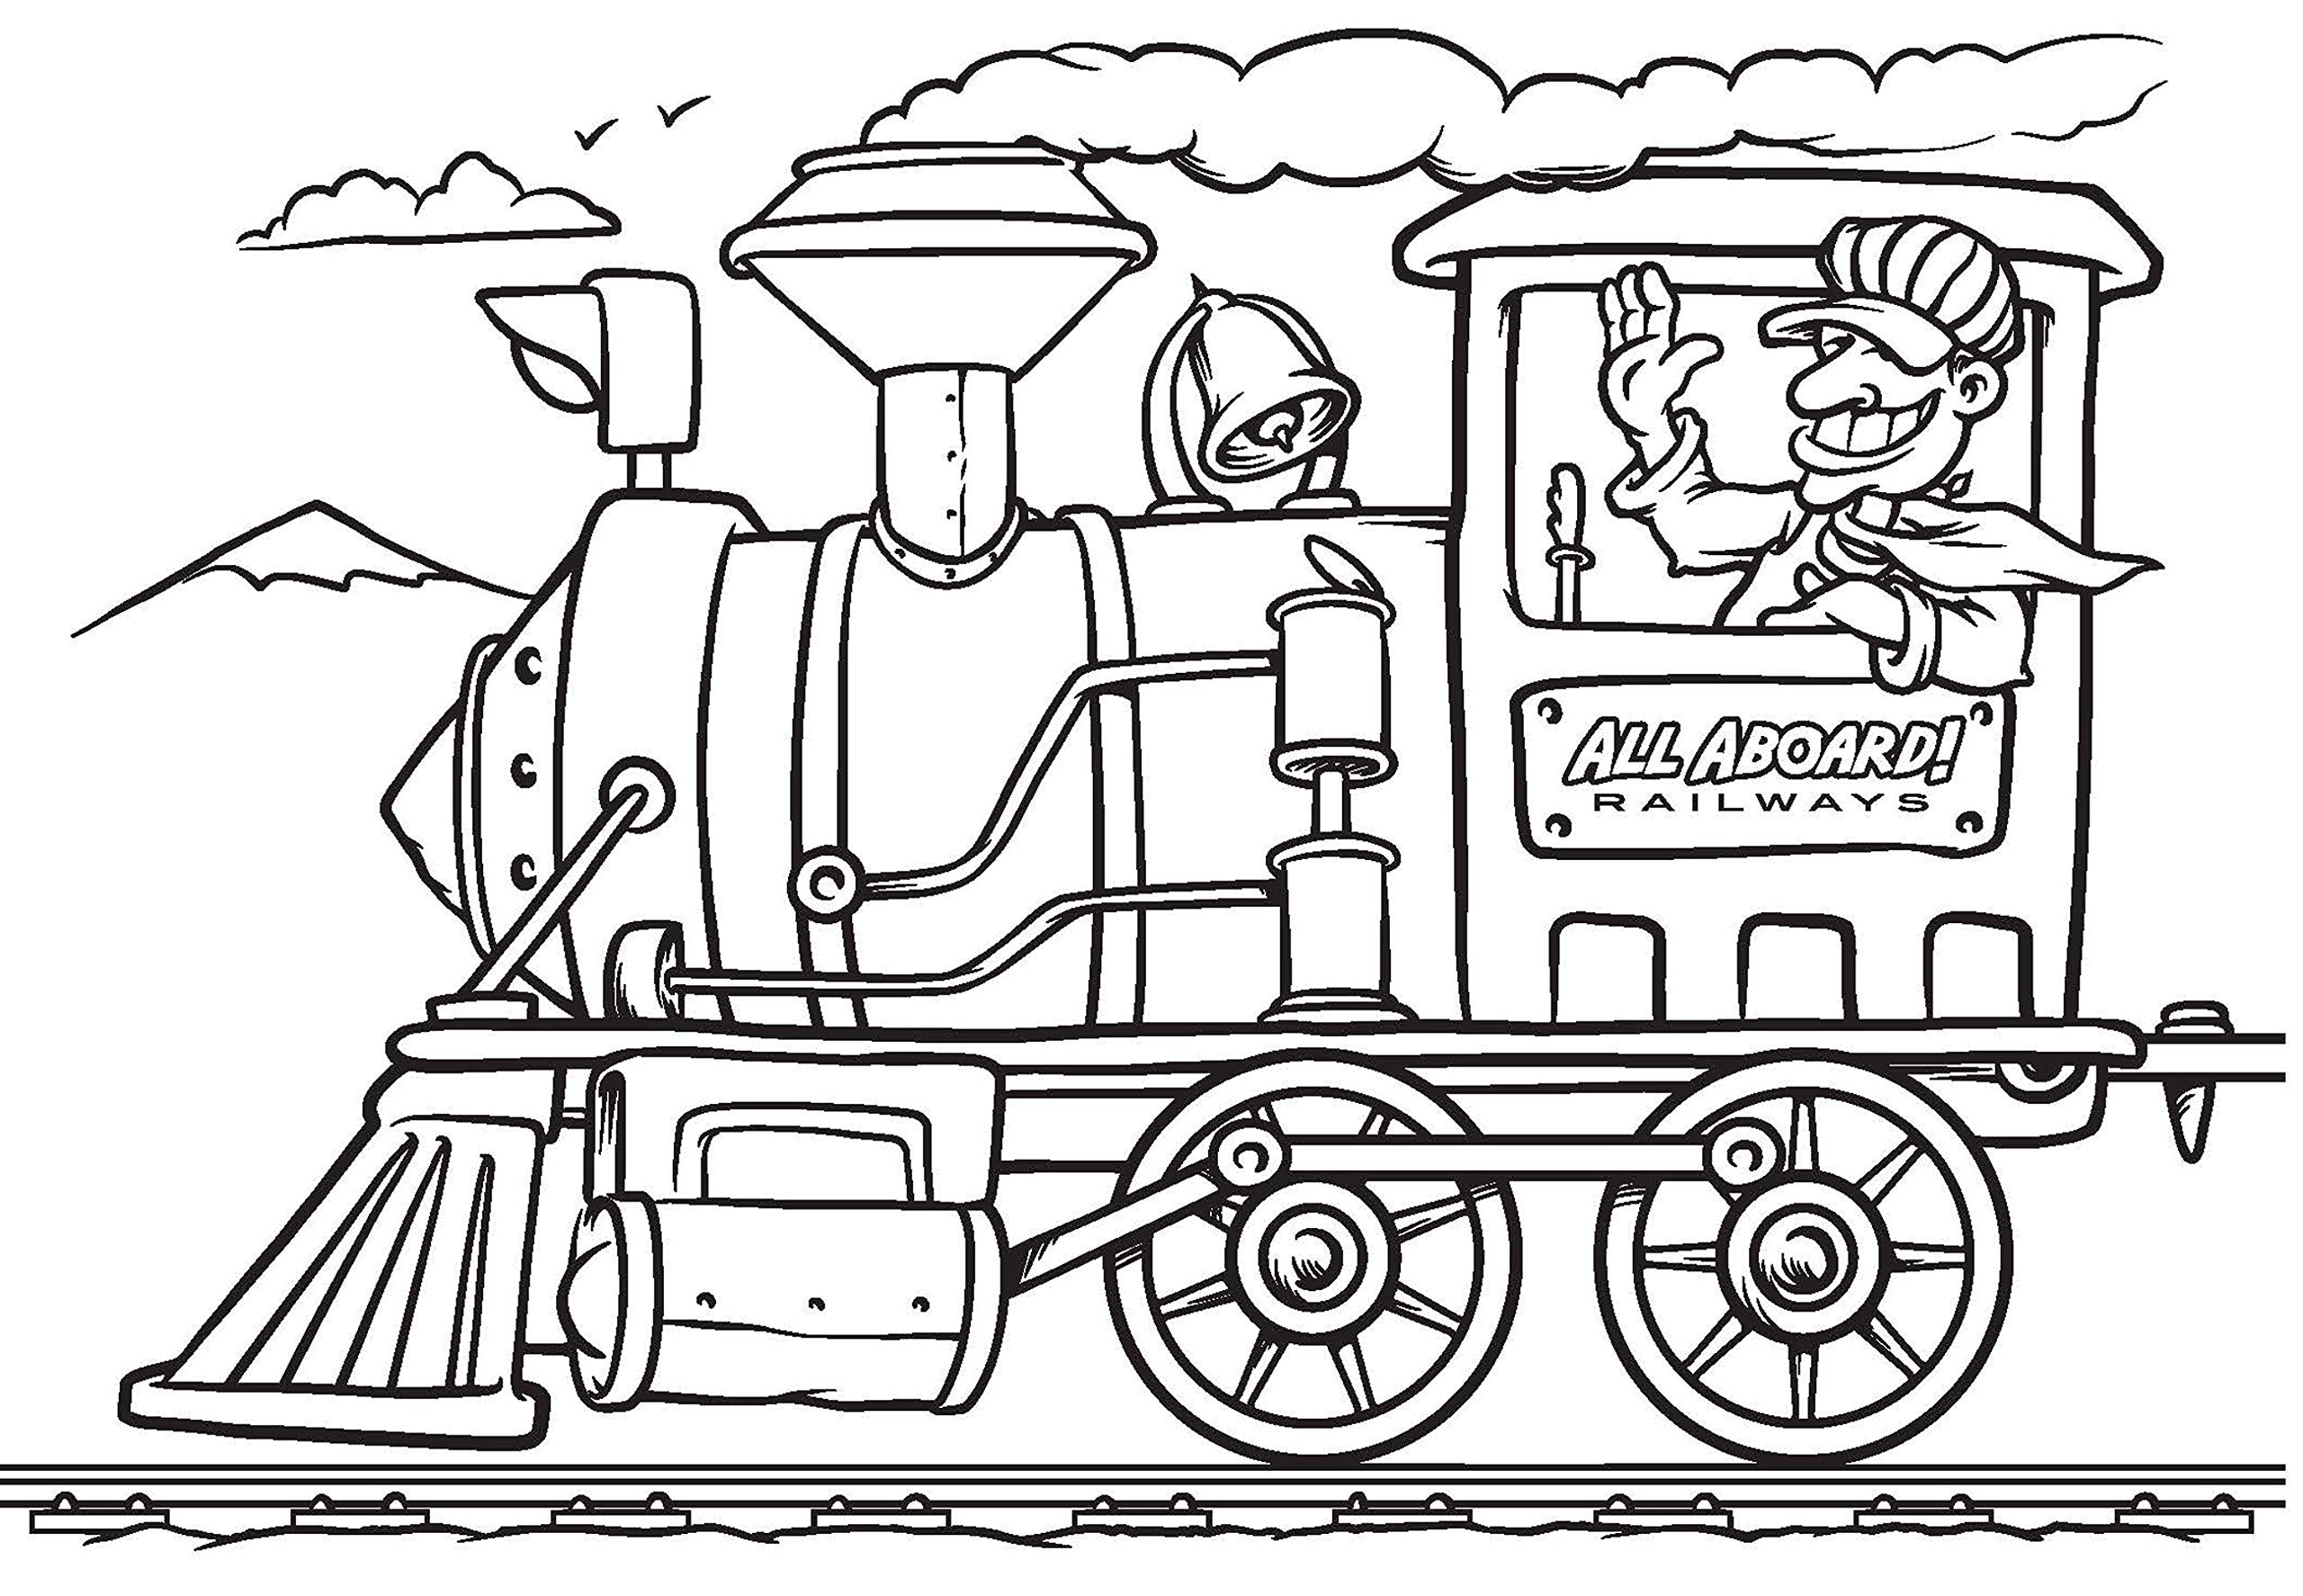 Things That Go Coloring Book Cars, Trucks, Planes, Trains and ...